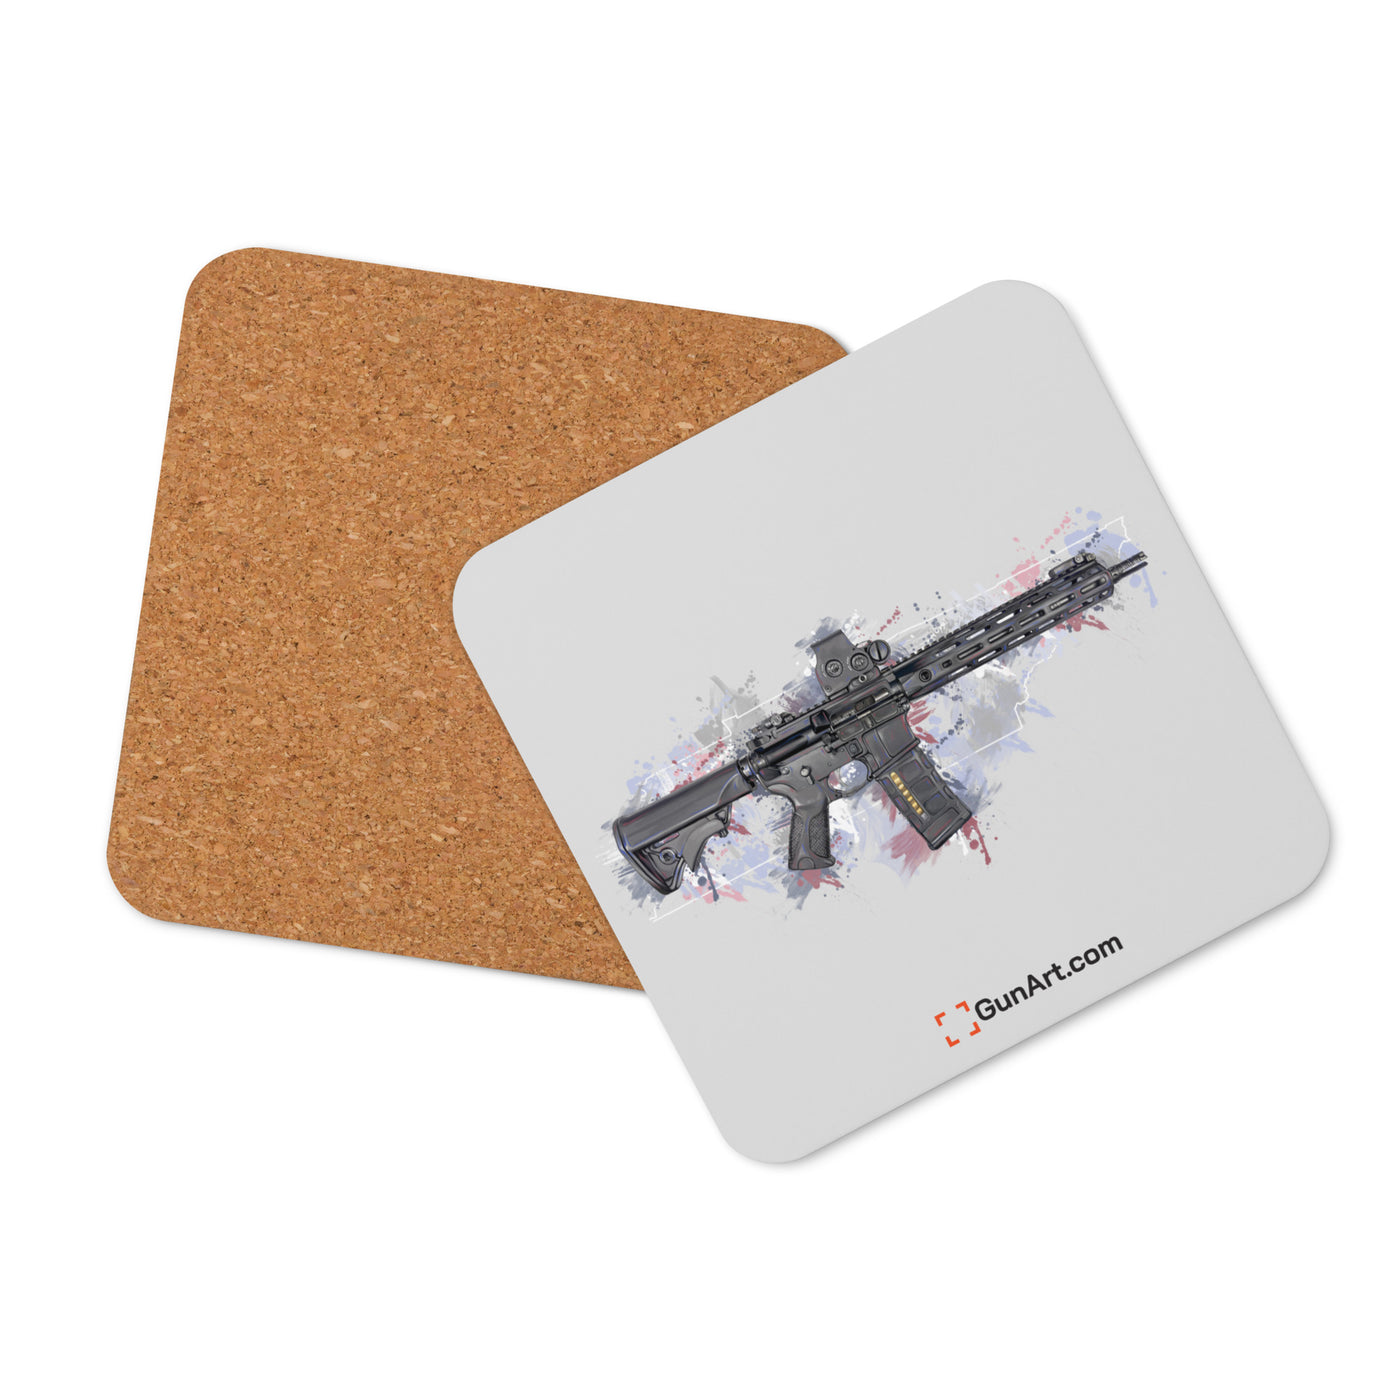 Defending Freedom - Tennessee - AR-15 State Cork-back Coaster - White State